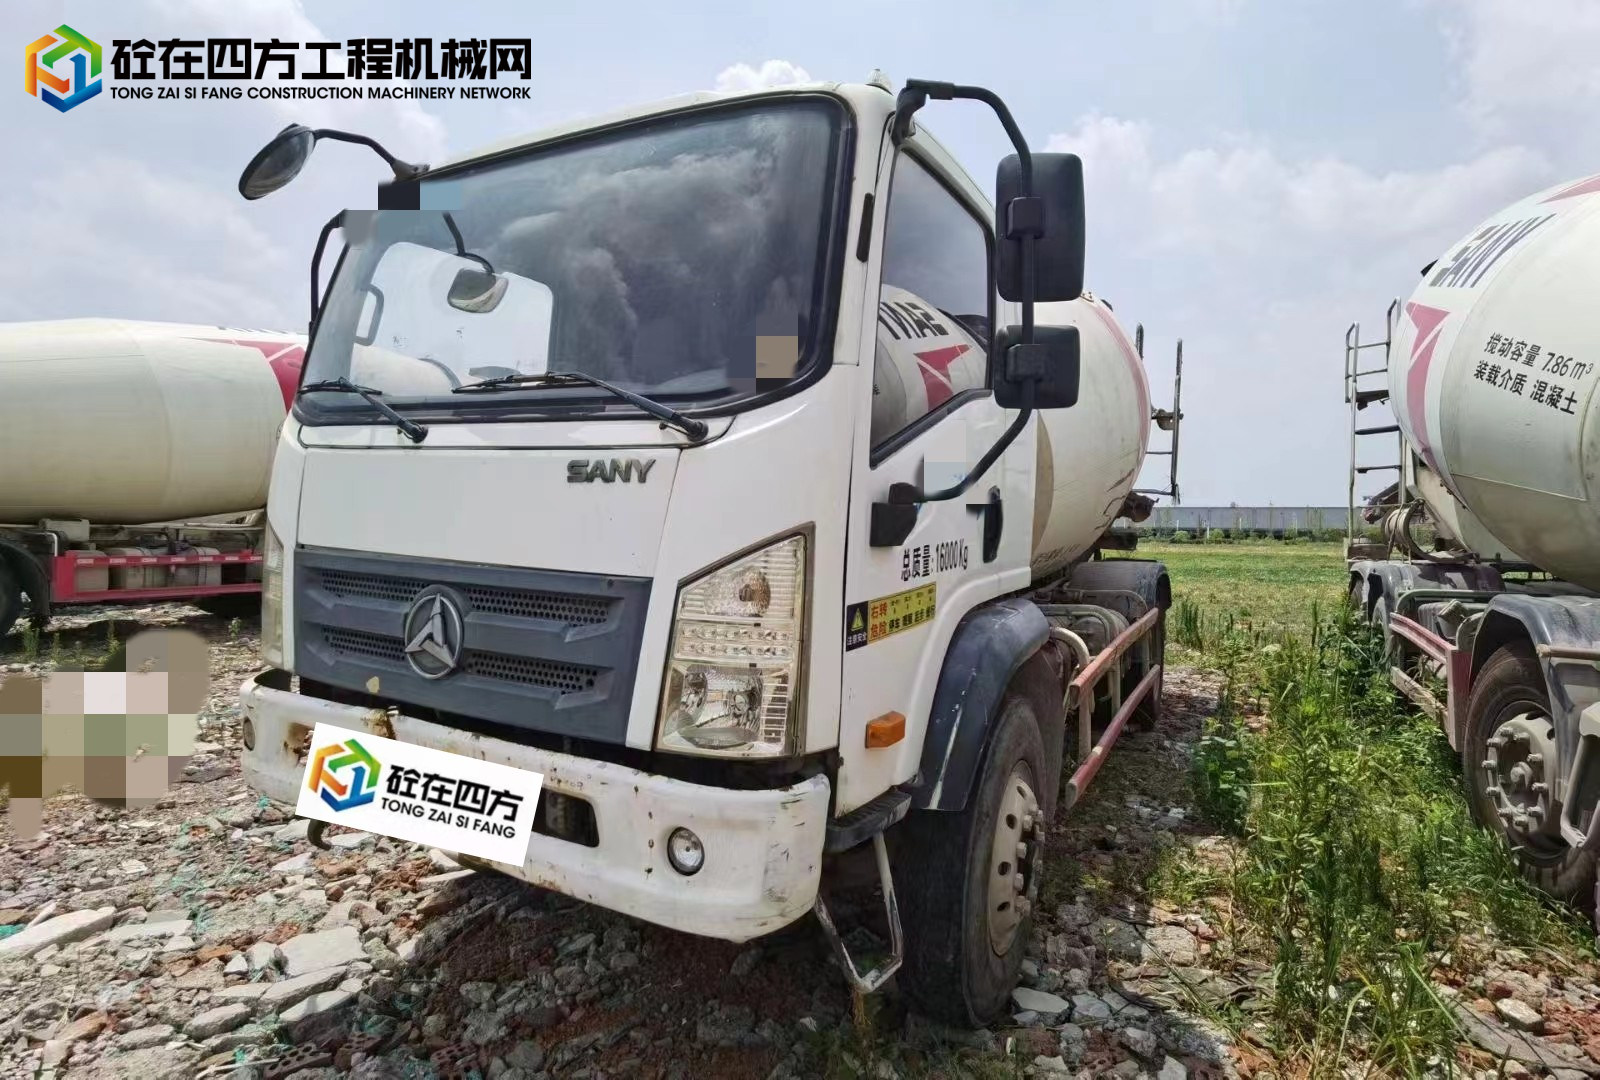 https://images.tongzsf.com/tong/truck_machine/20221108/1636a2278ab4a9.jpg